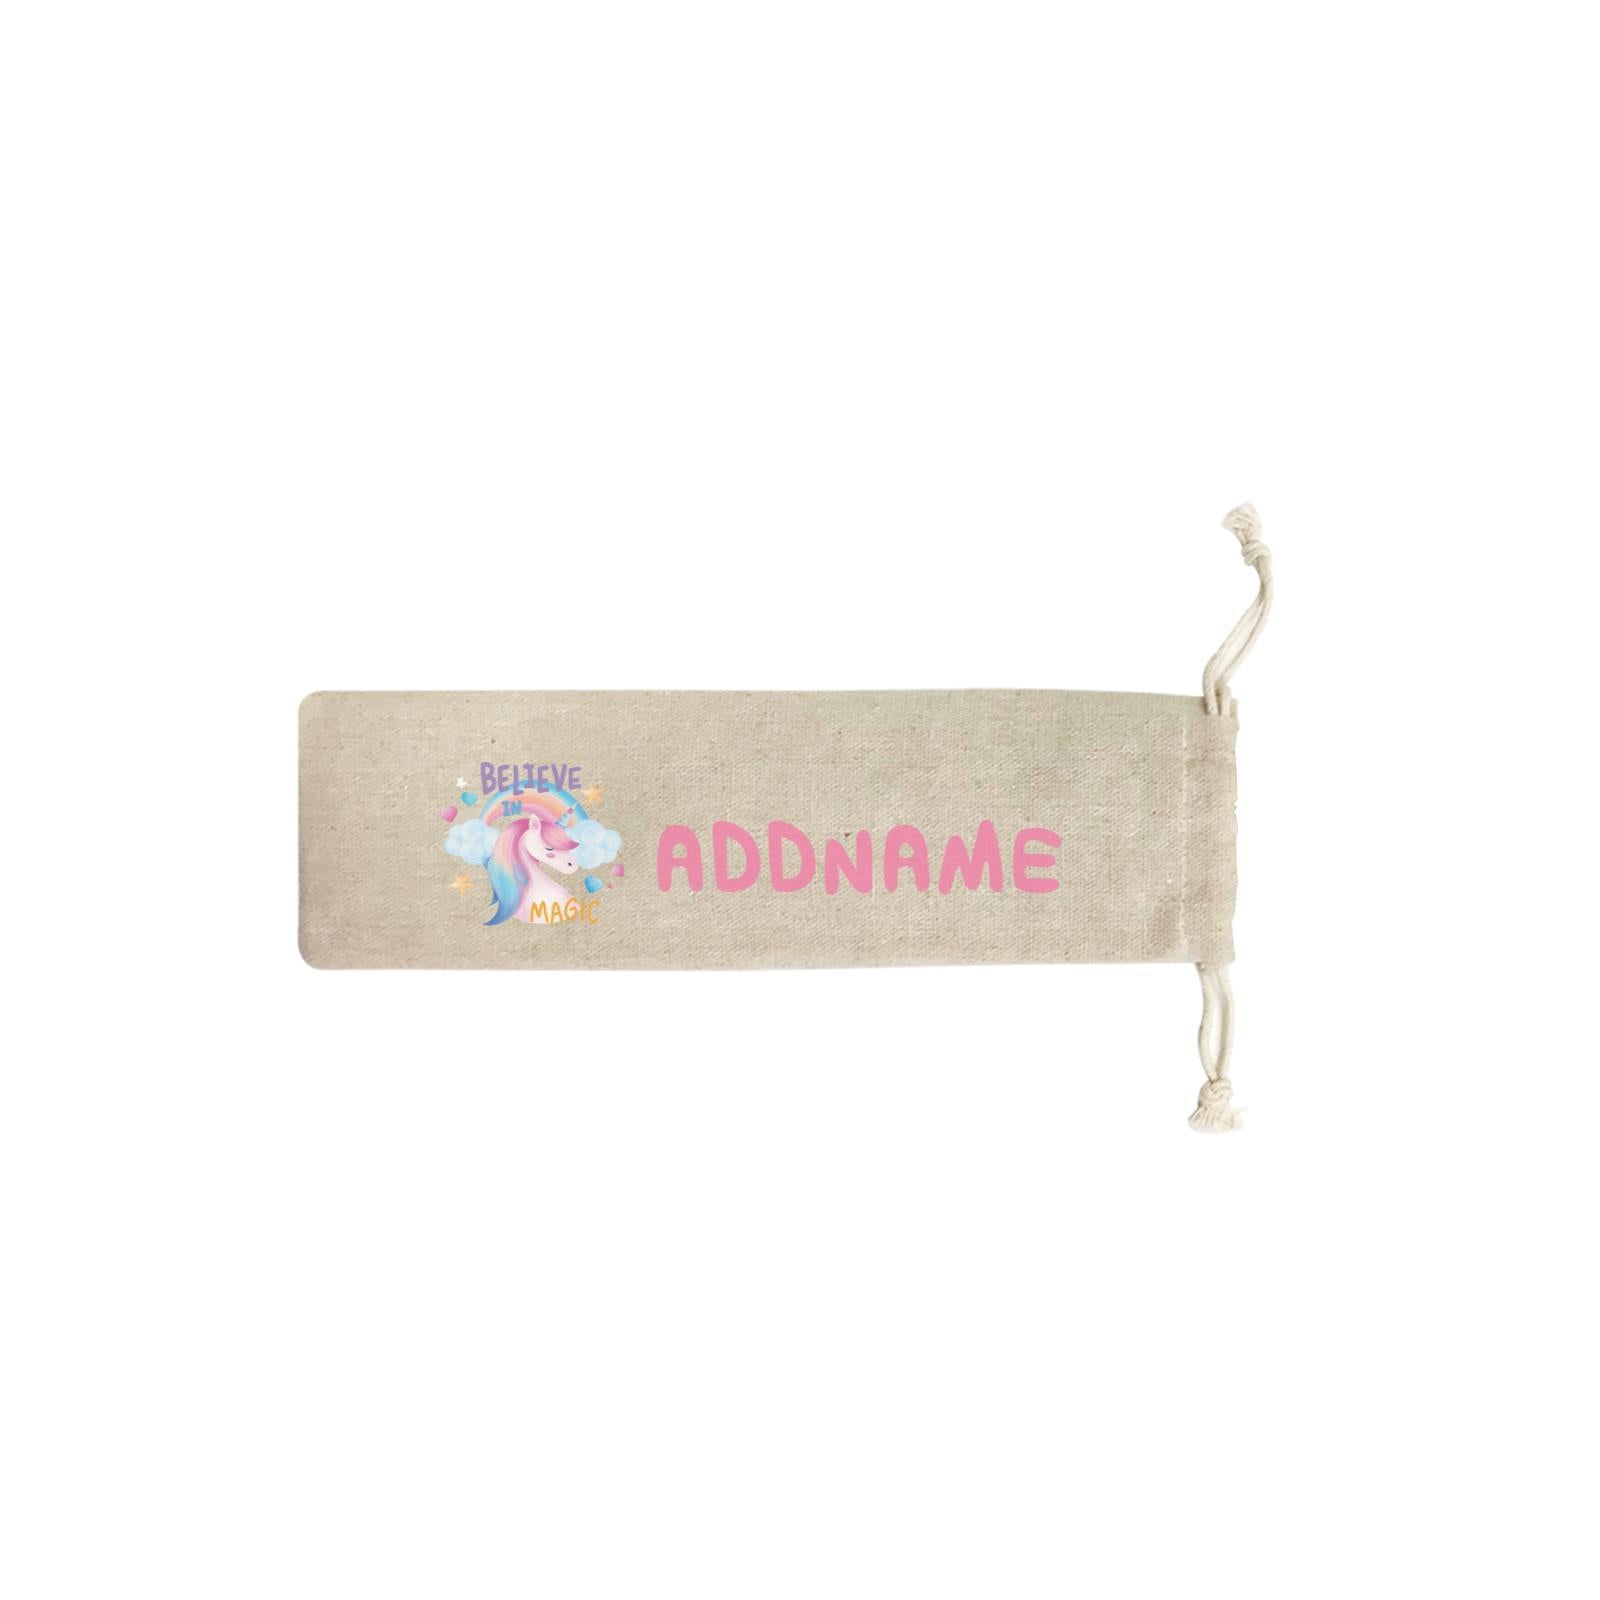 Children's Day Gift Series Believe In Magic Unicorn Addname SB Straw Pouch (No Straws included)